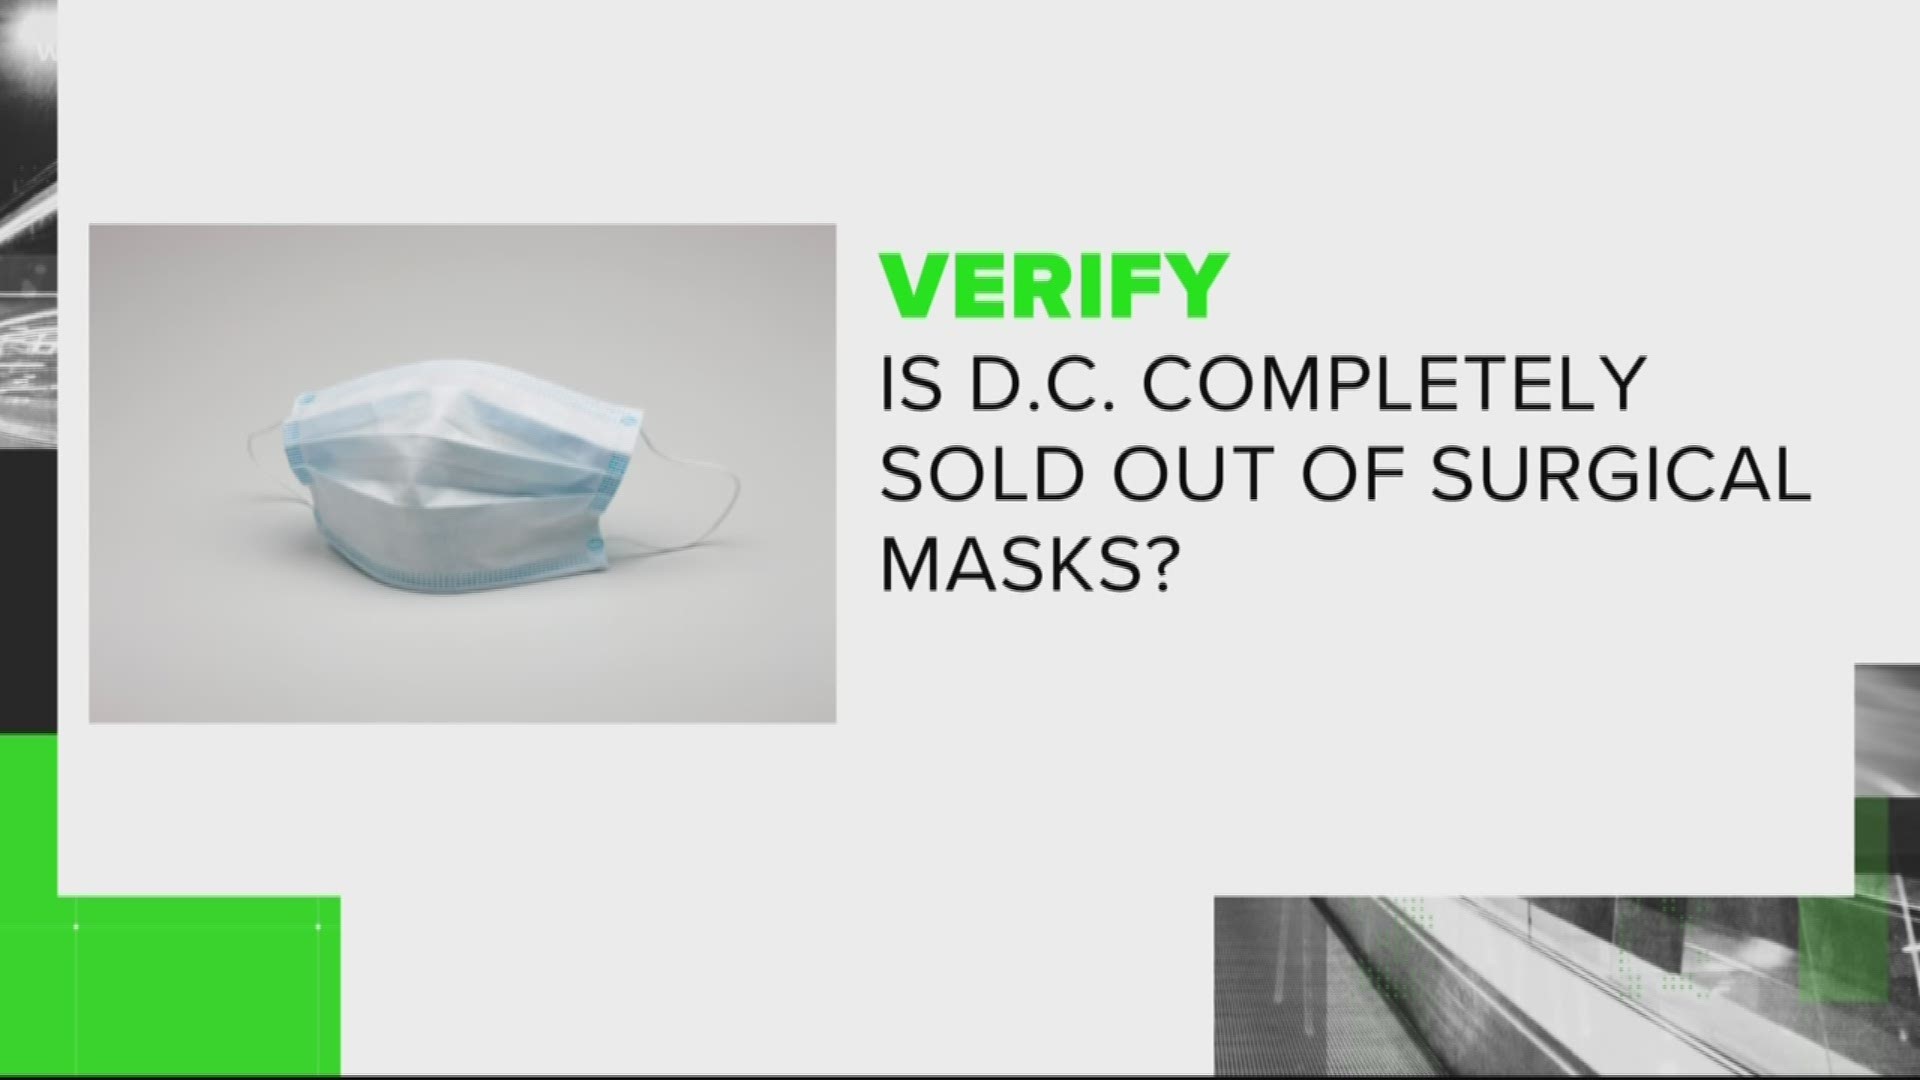 Amid fears of the Coronavirus, surgical masks are flying off pharmacy shelves. This has prompted some to claim that they're completely sold out. But are they?